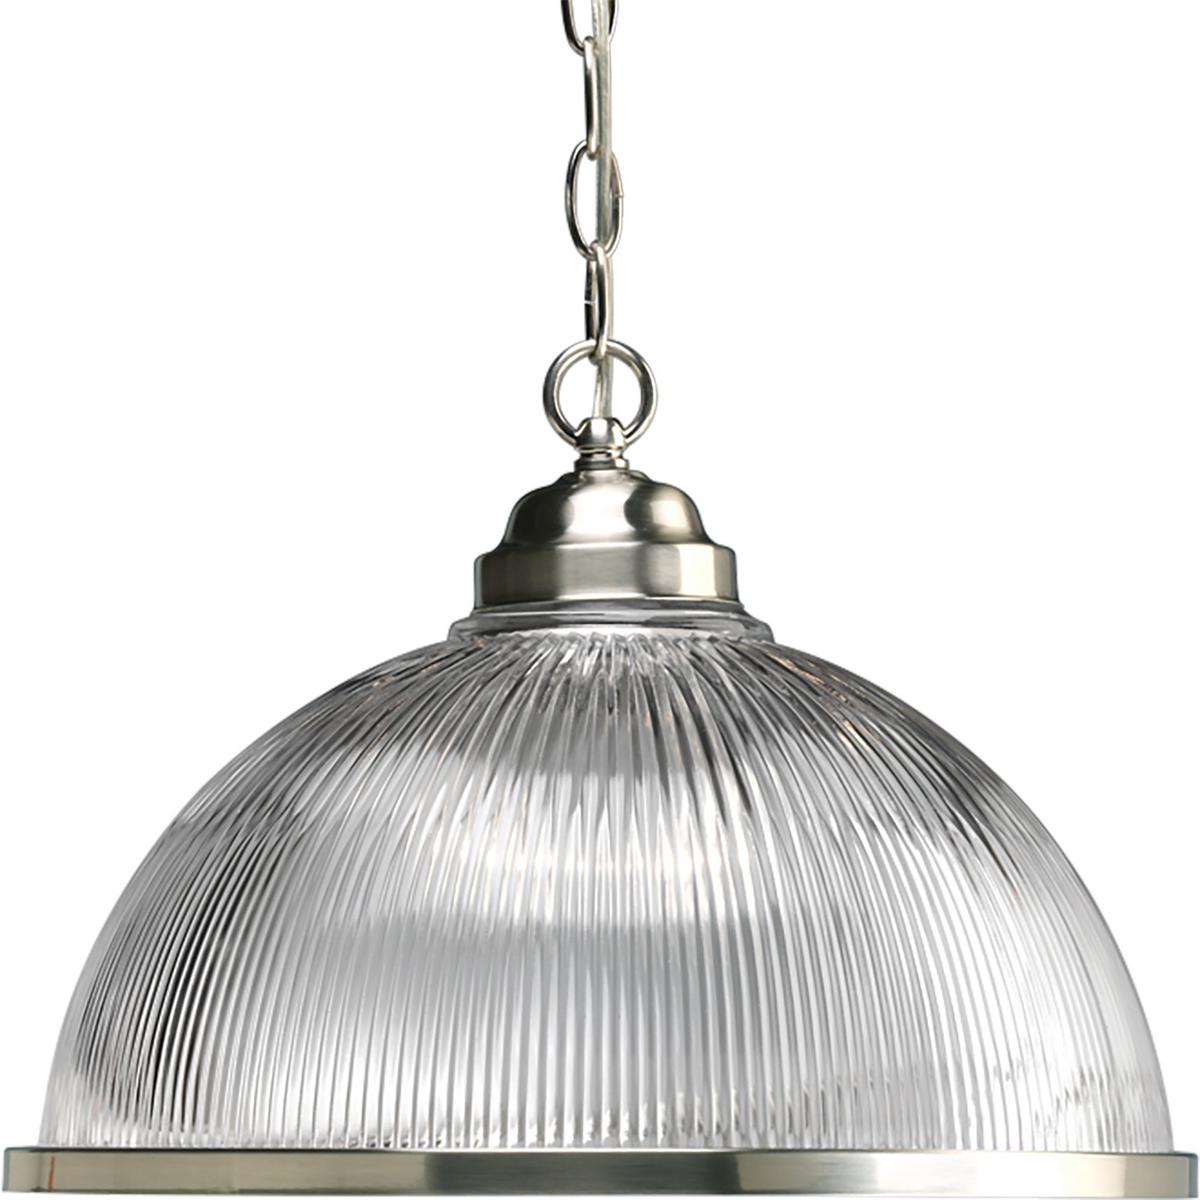 Hubbell P5103-09 One-light chain-hung pendant with a clear Prismatic glass dome and Brushed Nickel finish.  ; Brushed Nickel finish. ; Clear Prismatic glass. ; Three feet 9 gauge chain supplied.